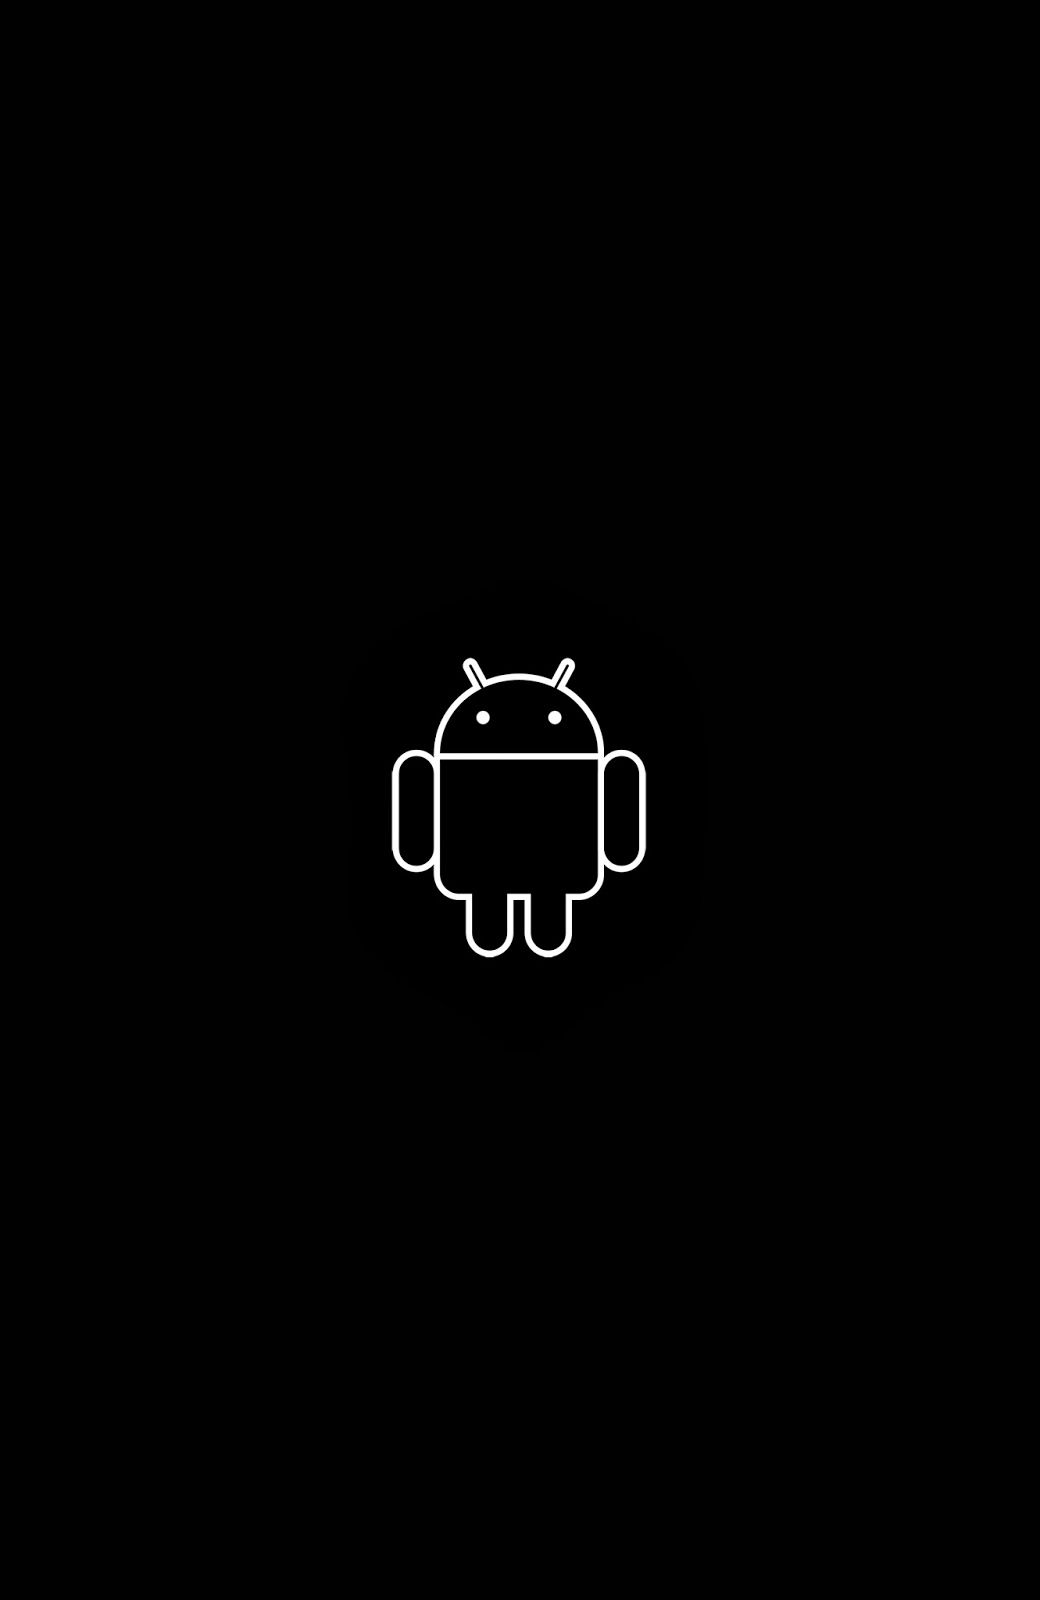 FruityMixer's Wallpaper: Black and white android simple android wallpaper (2600x4000 HQ)